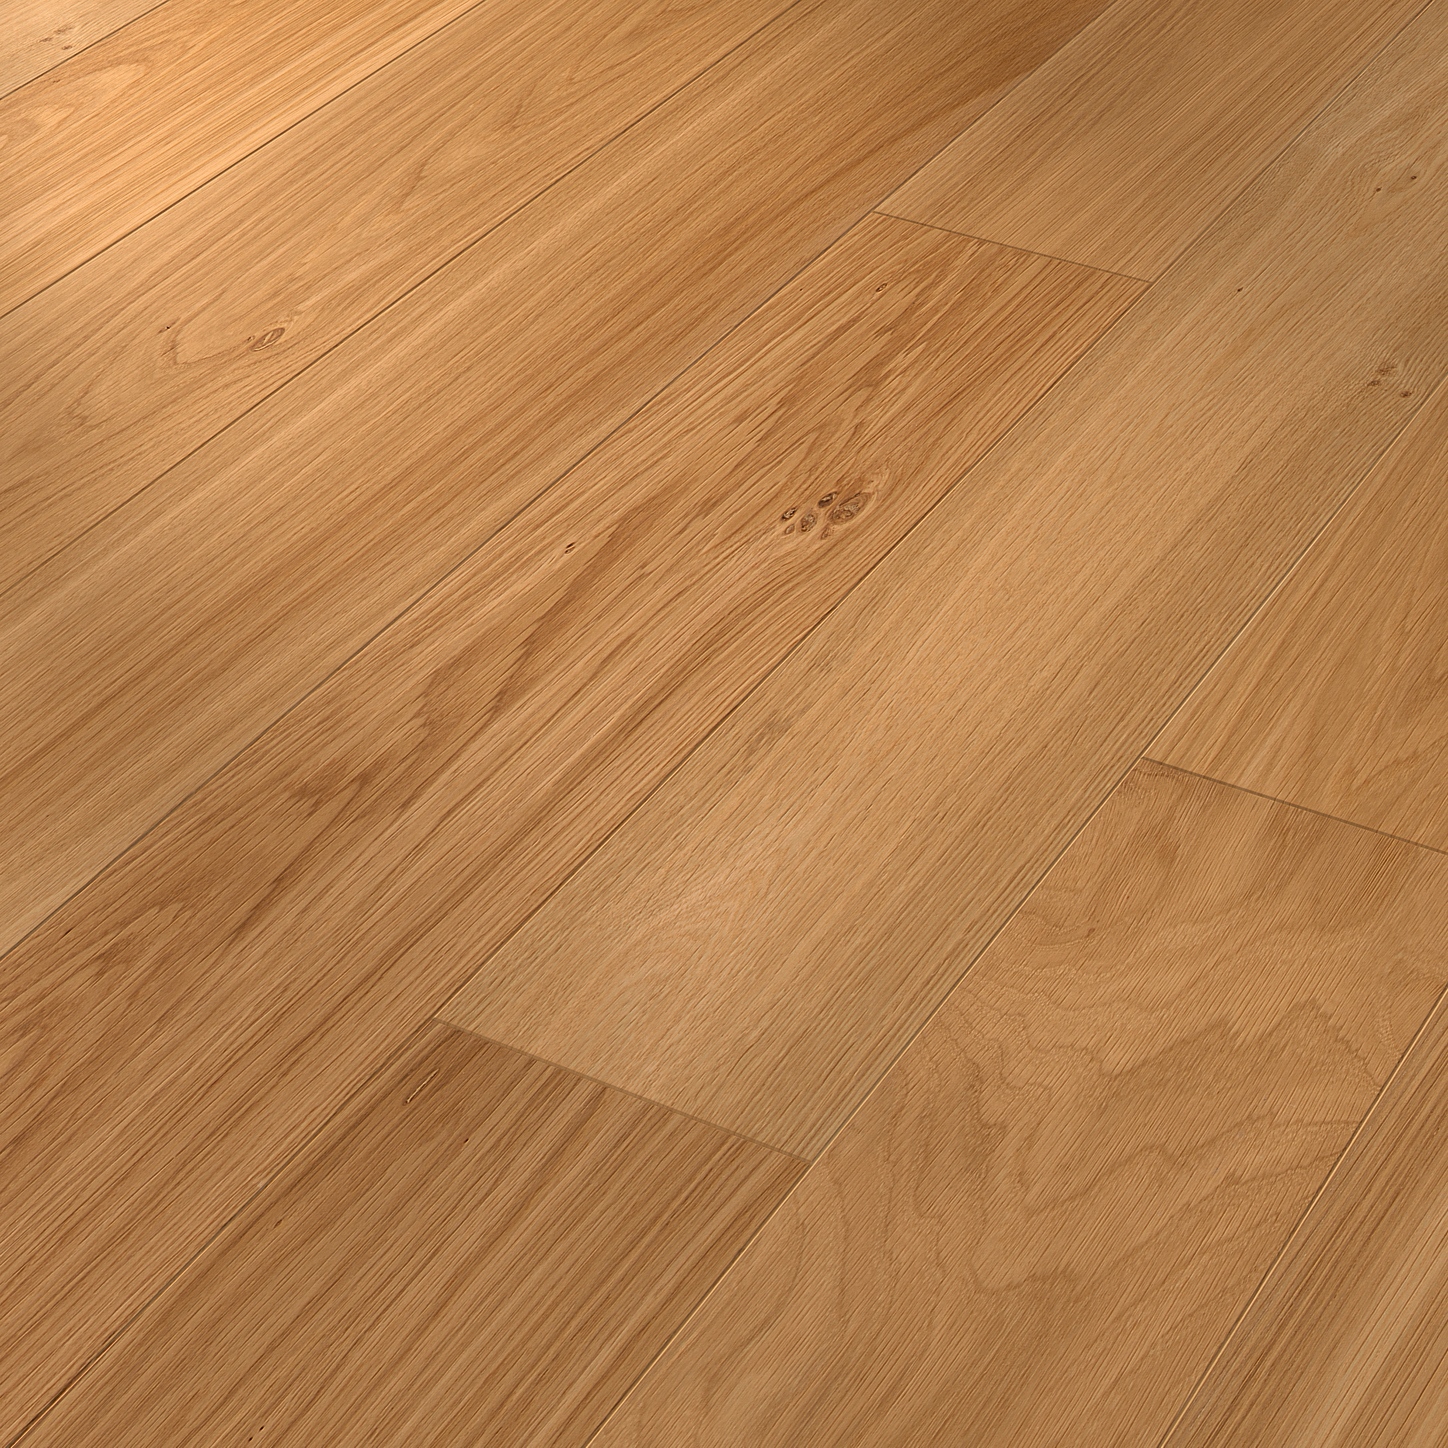 PARAT 20 Oak RB nature oiled solid plank